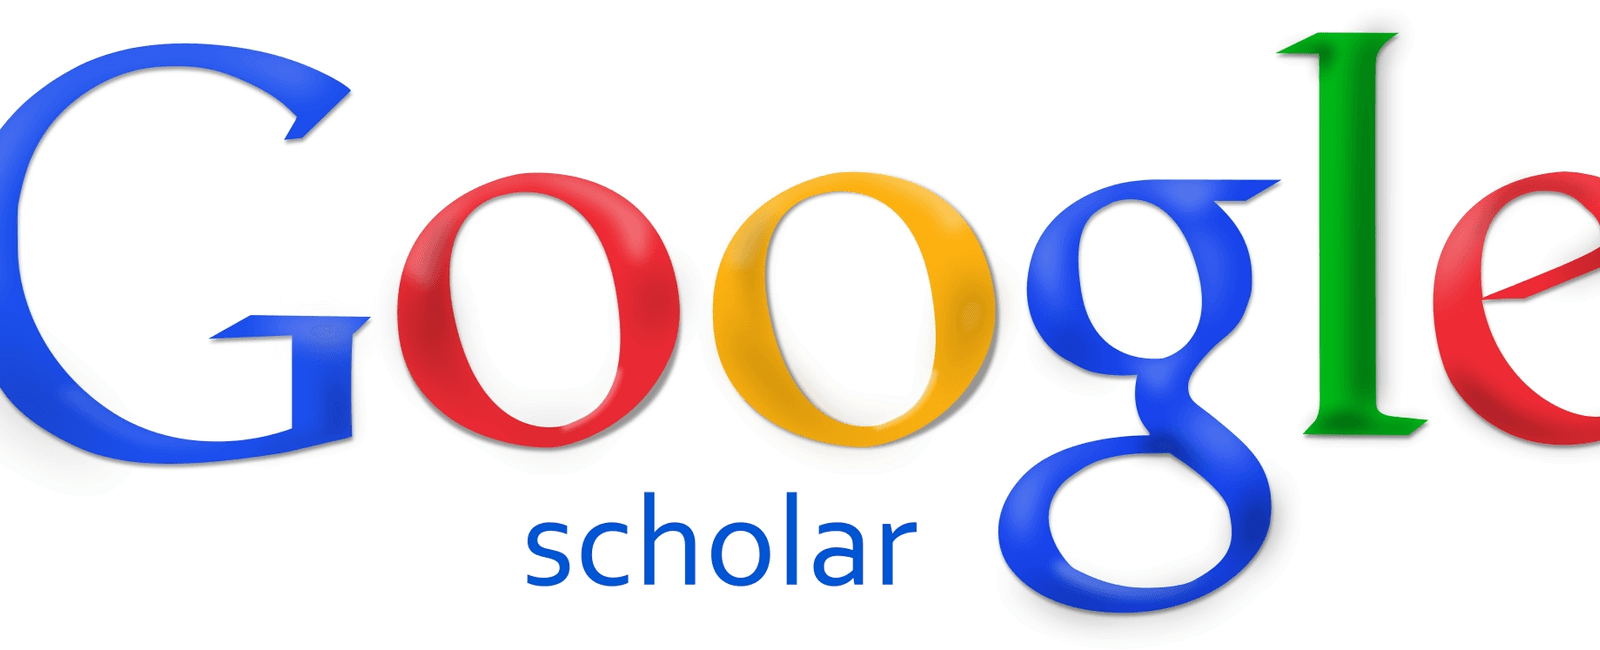 Your best search mate for college assignments is not google com use scholar google com instead try adding pdf to find downloadable copies